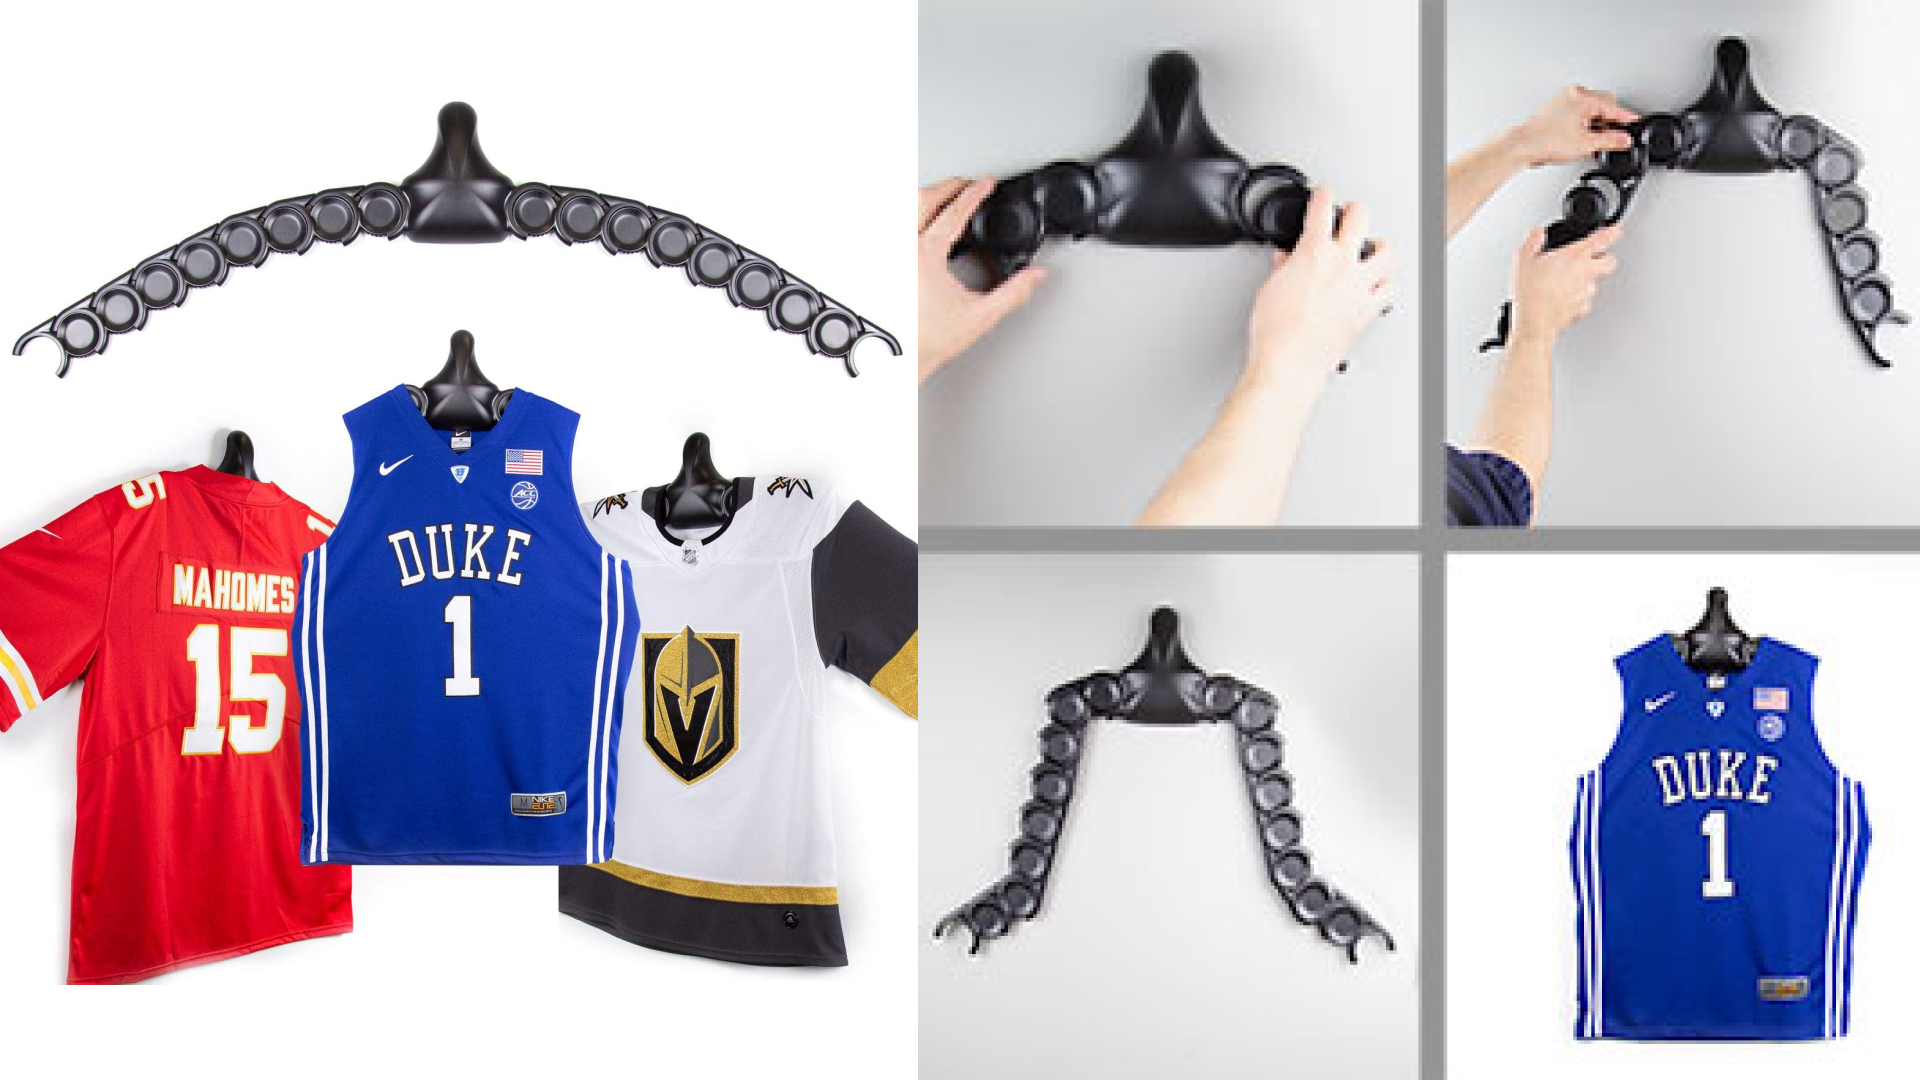 A tool to help him hang up all his jerseys